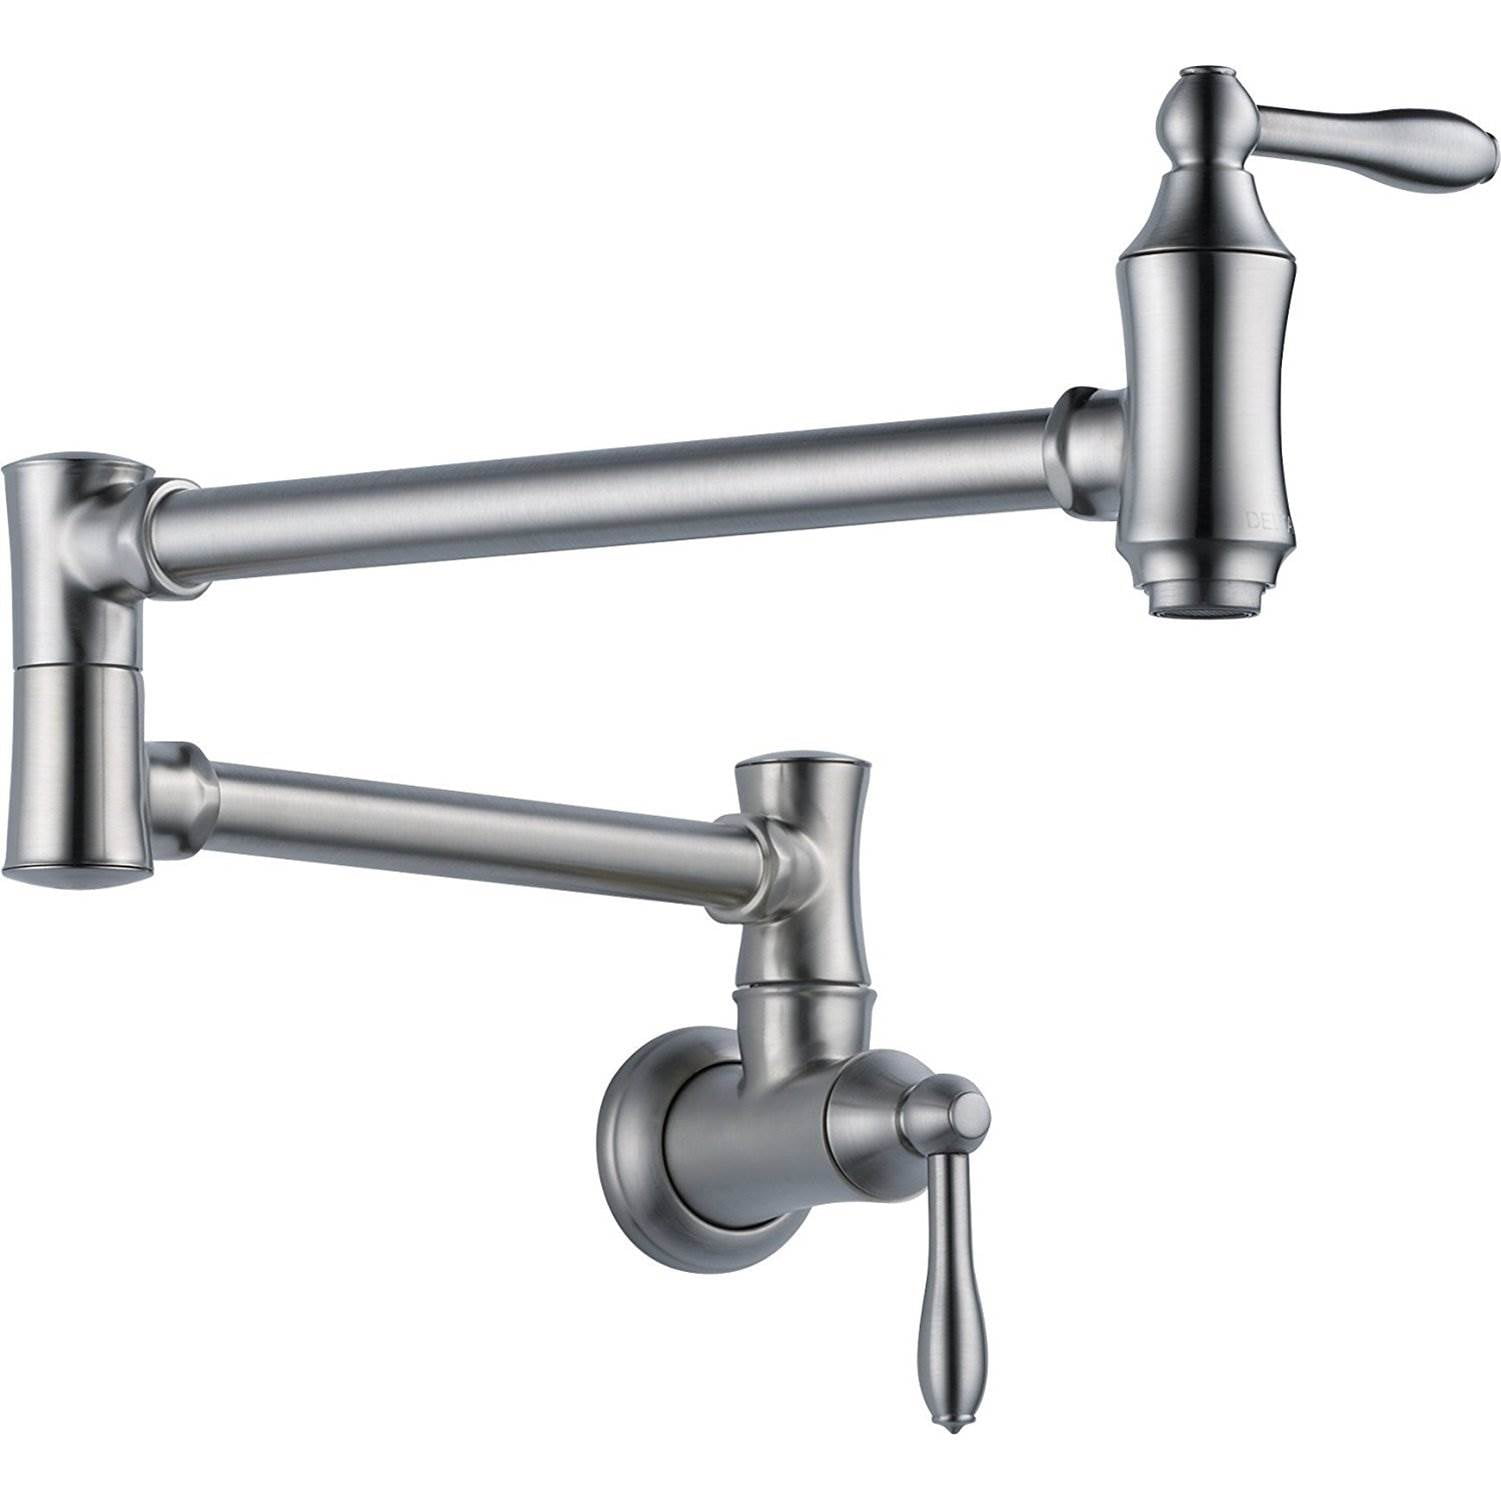 Delta Faucets Victorian Home Pot Filler Wall Faucet 2 Pack Polished Nickel 